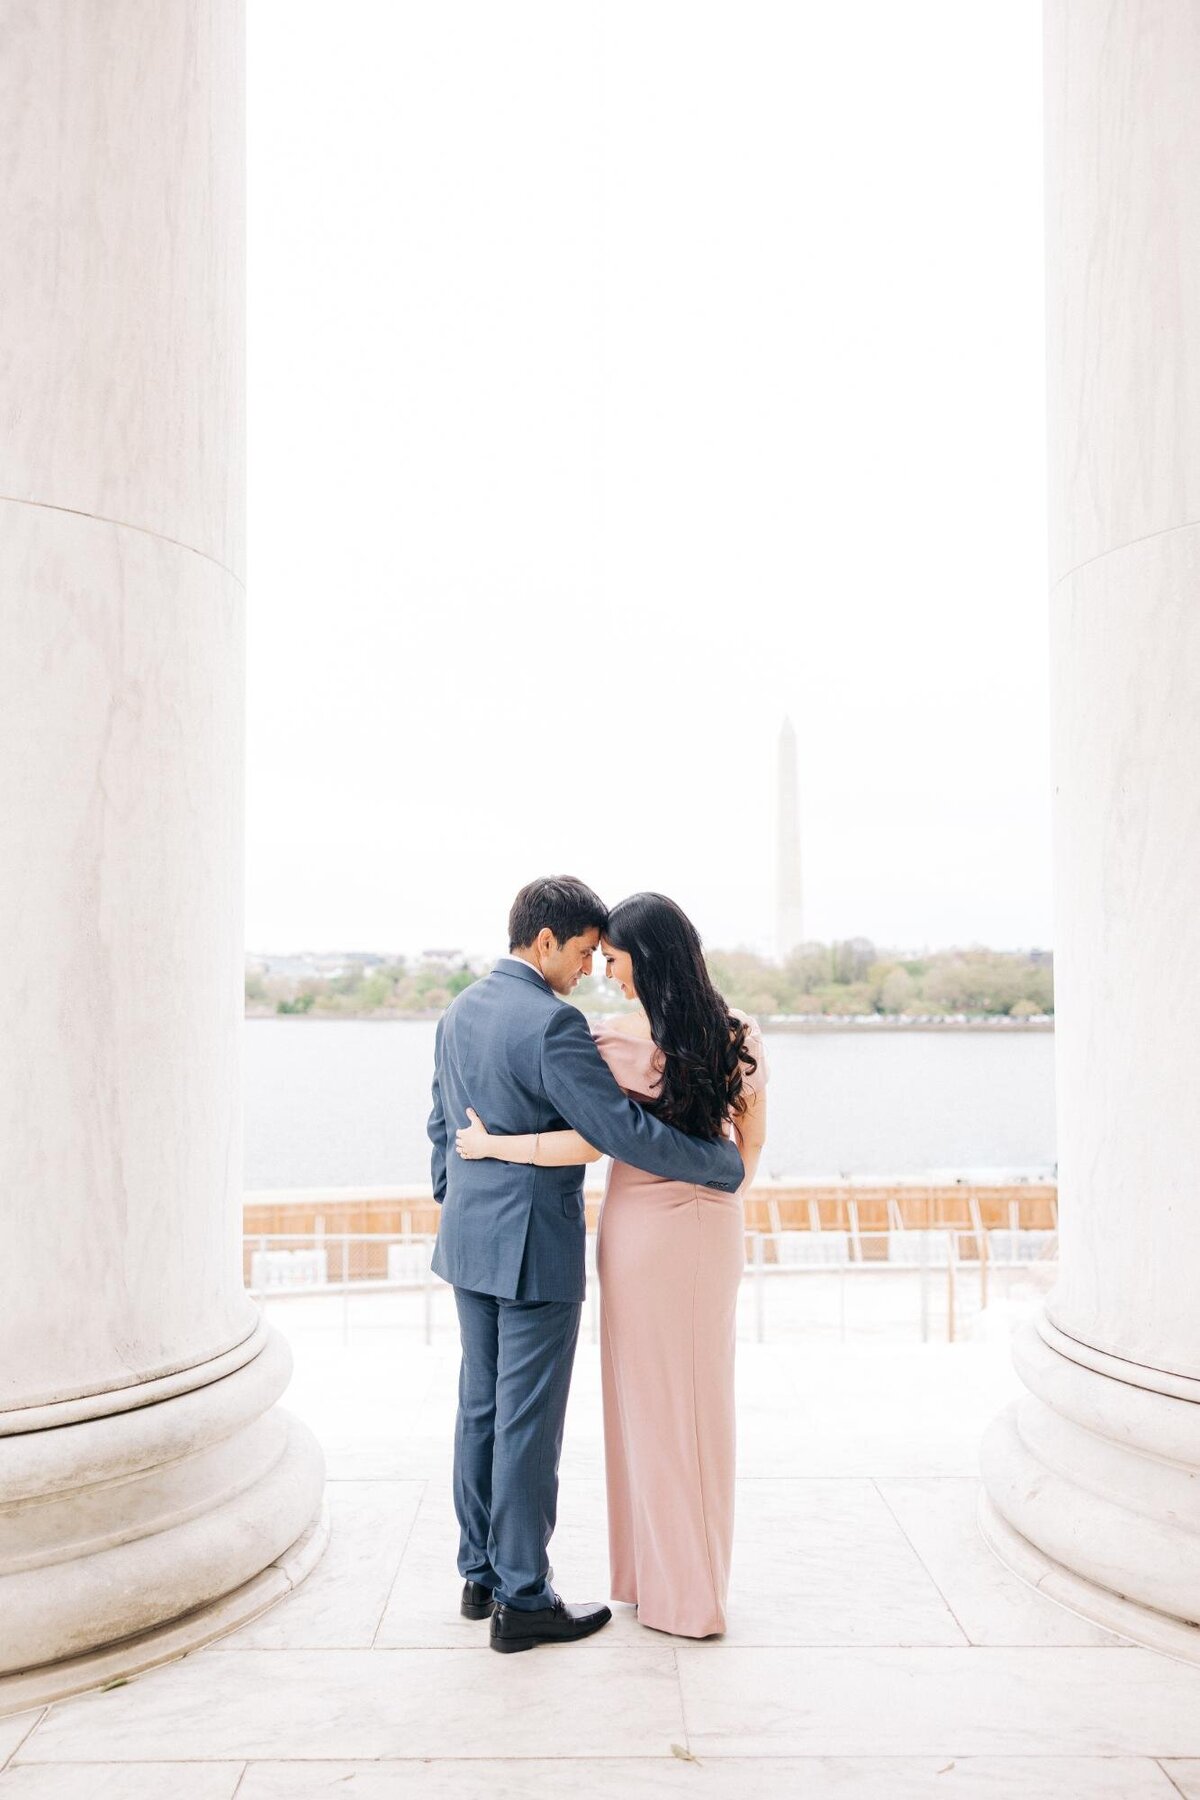 A couple embracing under a white columned structure with the washington monument visible in the background.